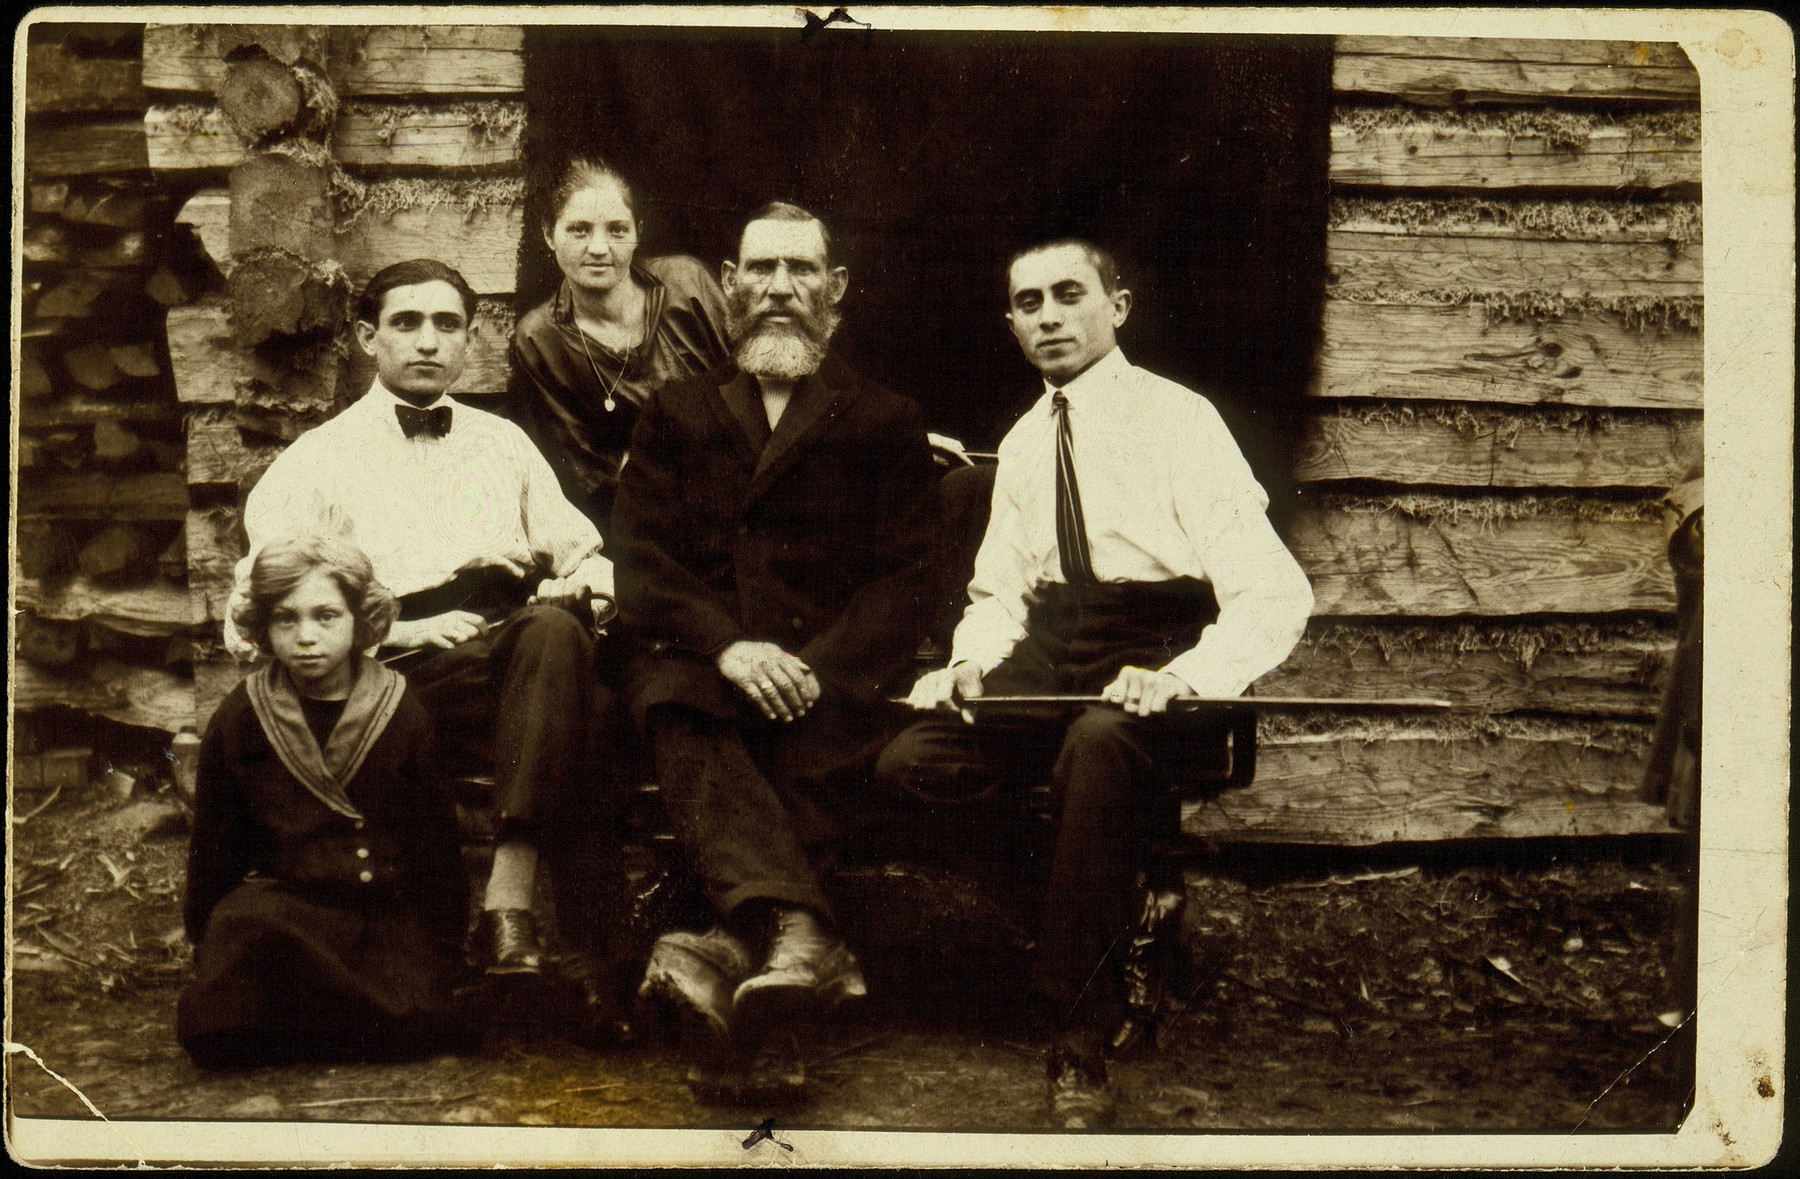 The Kremin family sits at the entrance to a log cabin. 

Yude-Mendl Kremin (center), with his son-in-law Hirshl Tatarski (right), daughter Rivka Tatarski, son Hayyim-Itchke, and granddaughter Hayya-Rochke Shmidt. 

Yude-Medl had a clubfoot as a result of a severe beating by Lida coachmen during a labor dispute.  Yude-Mendl died a natural death; all the others perished in the September 1941 massacre.